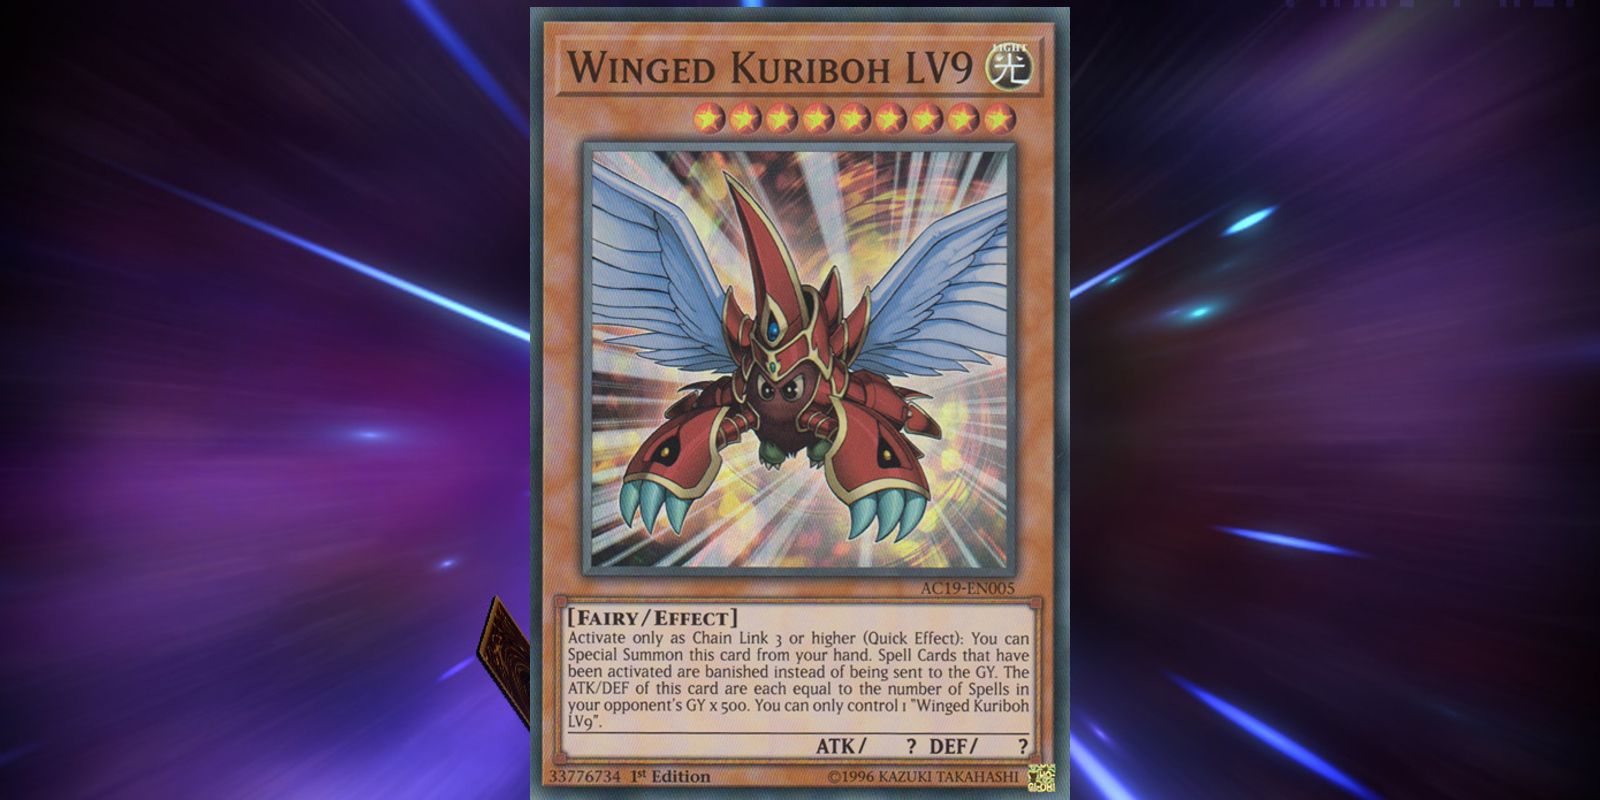 Winged Kuriboh LV9 has great offensive potential in Yu-Gi-Oh! Master Duel.